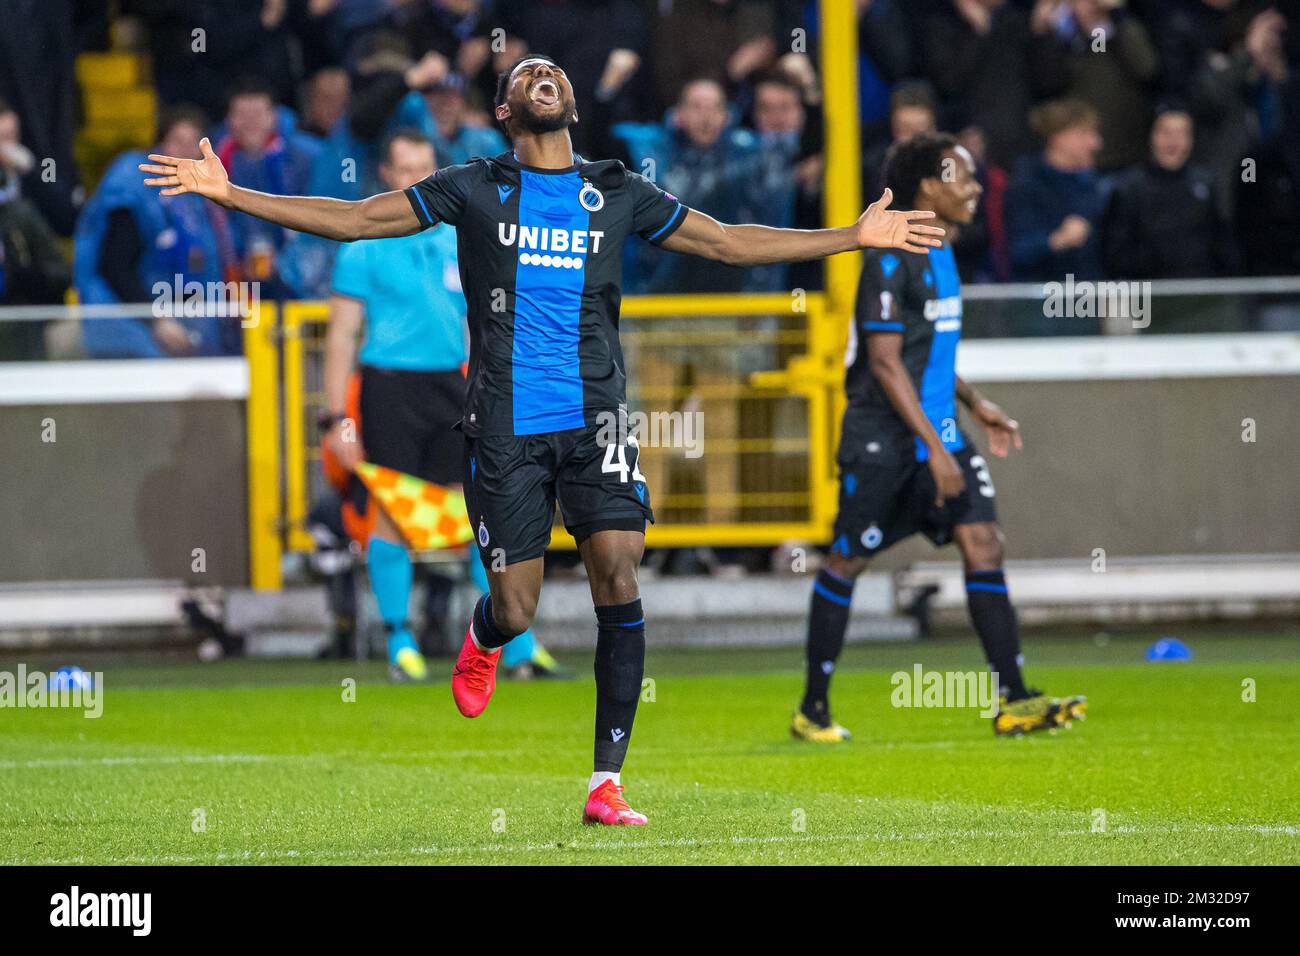 Club's Emmanuel Bonaventure Dennis celebrates after scoring during a game of the 1/16 finals of the UEFA Europa League between Belgian soccer club Club Brugge and English club Manchetser United, in Brugge, Thursday 20 February 2020. BELGA PHOTO Stock Photo